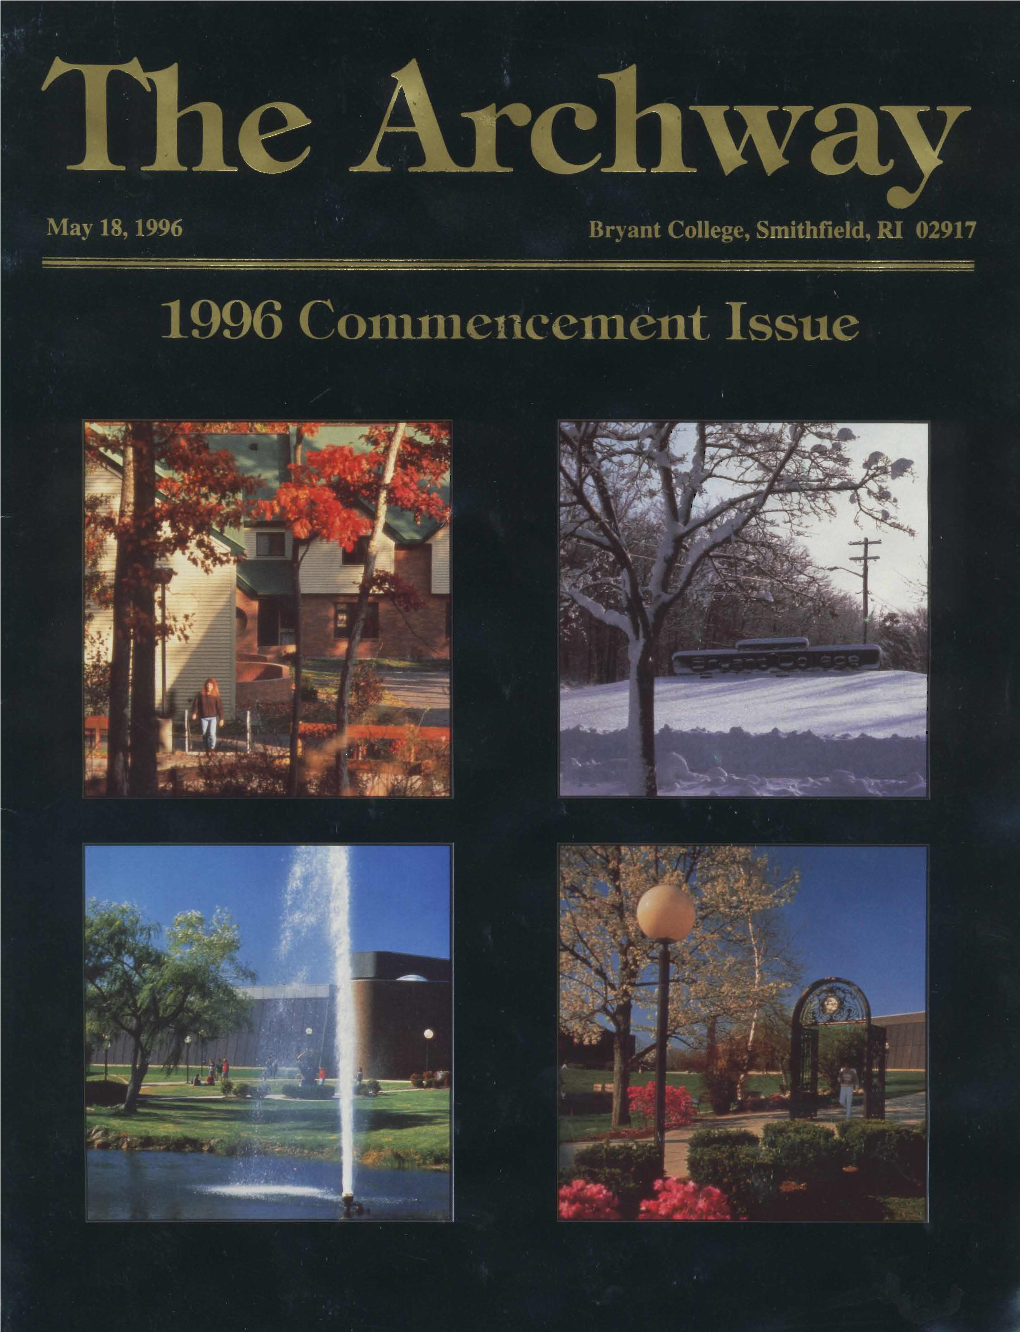 Archway Commencement Issue, May 1996